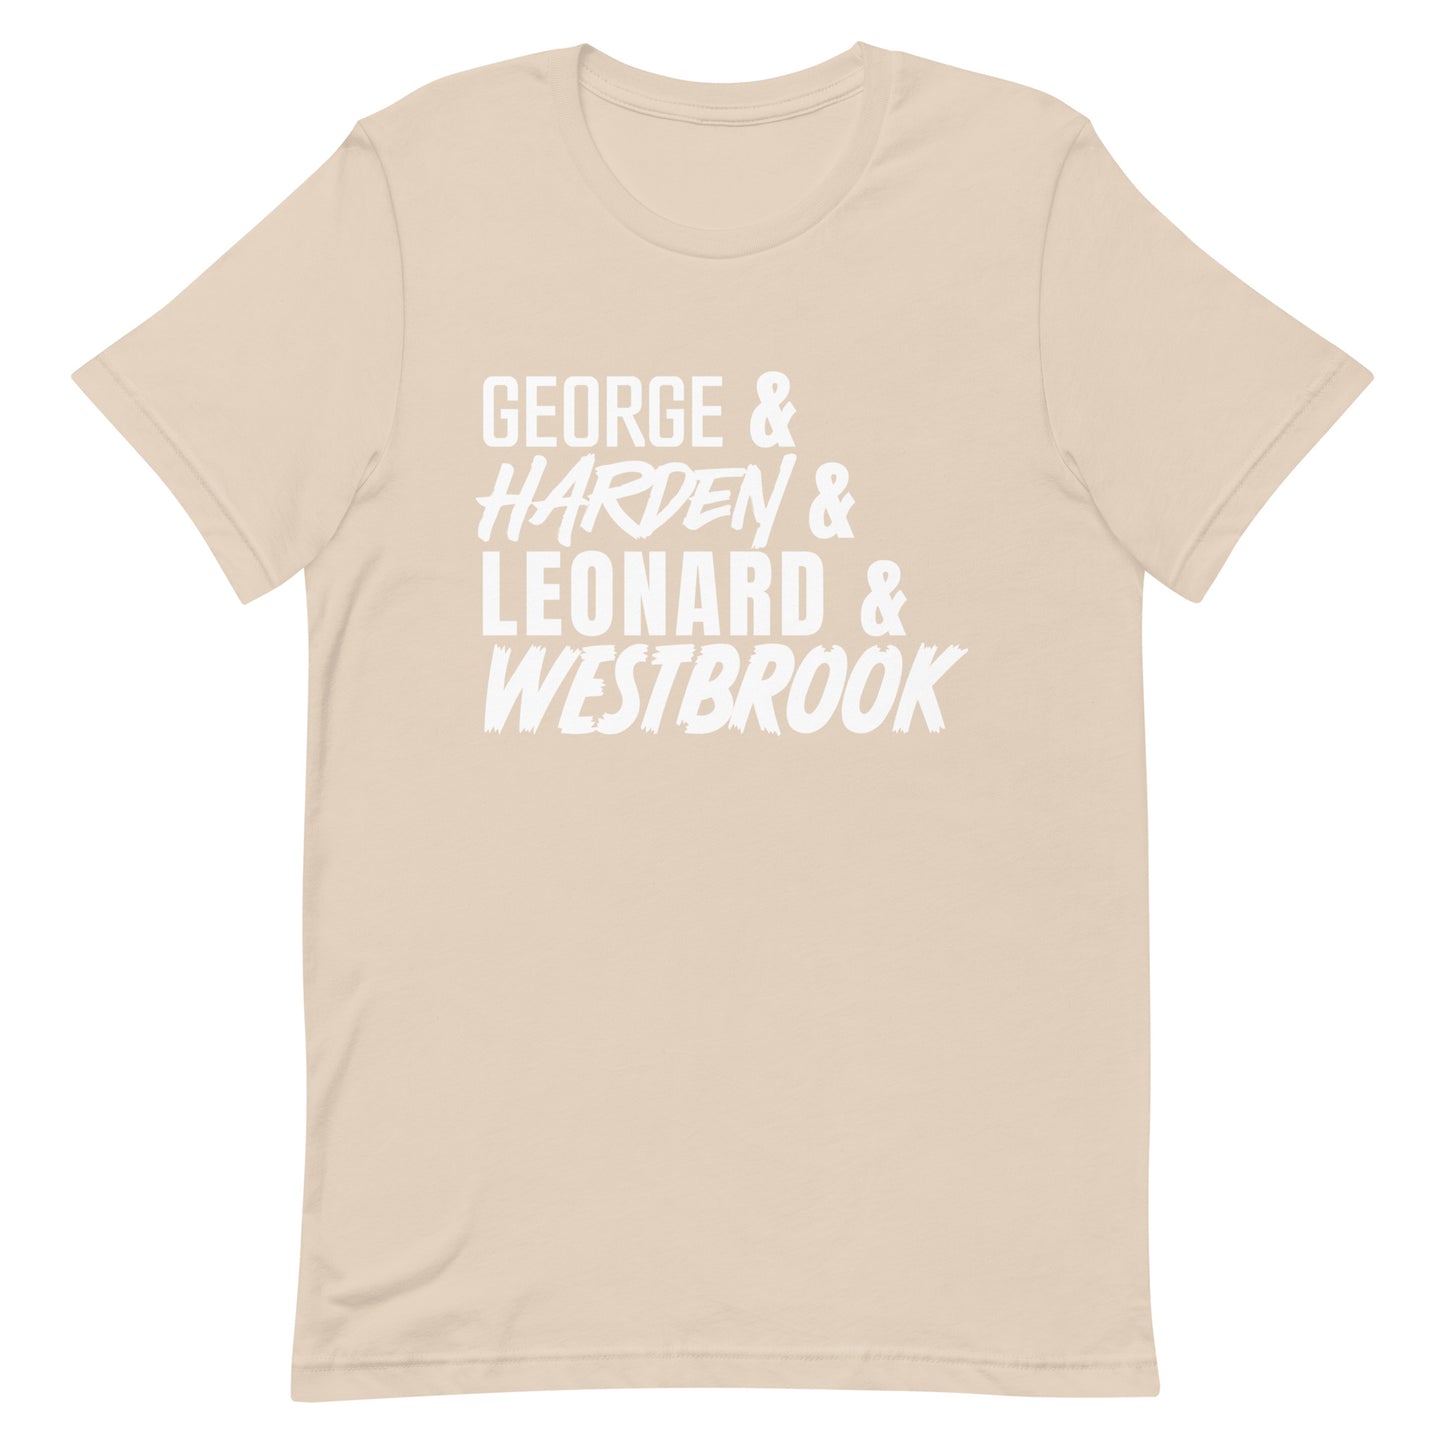 George Harden Leonard Westbrook Clippers Big Four Graphic Tee